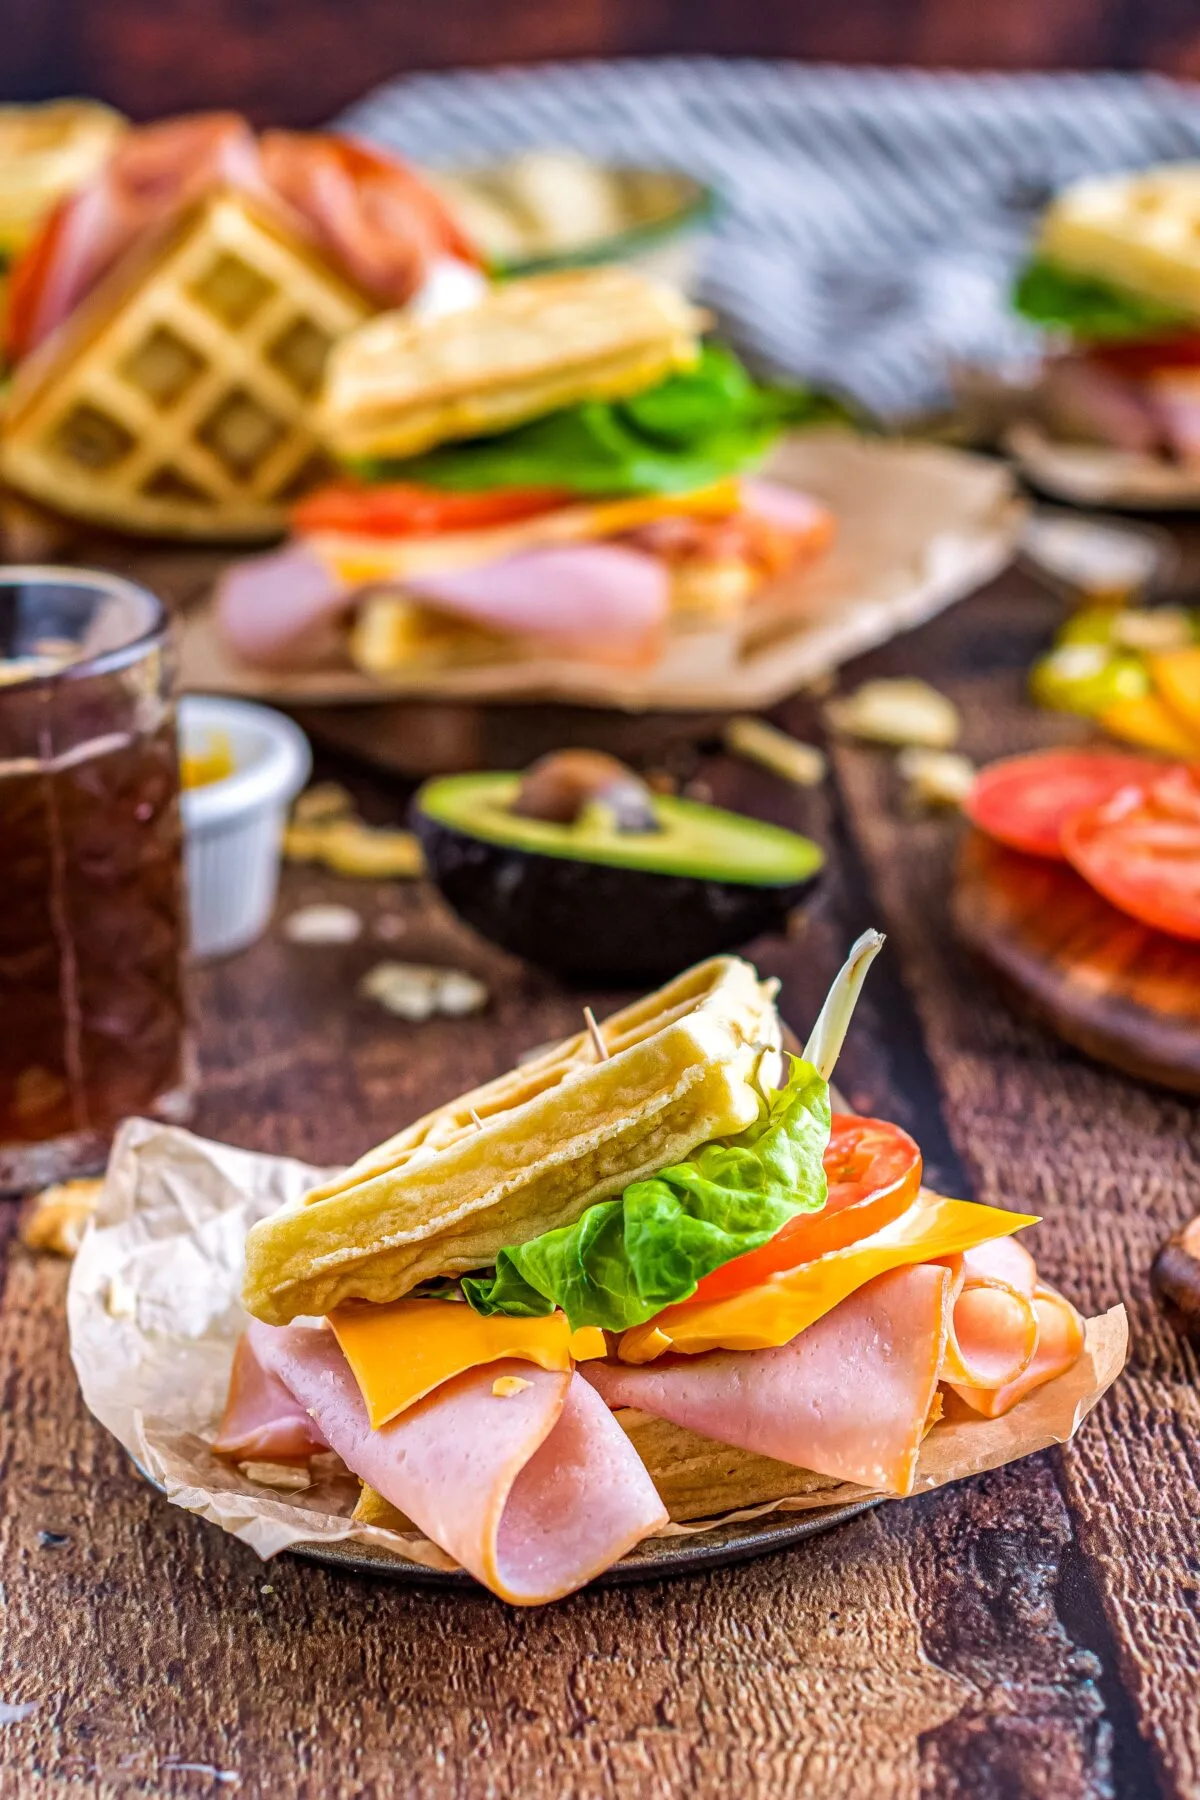 Upgrade your lunch with these ham and cheese waffle sandwiches featuring fluffy homemade waffles with perfectly crisp edges.